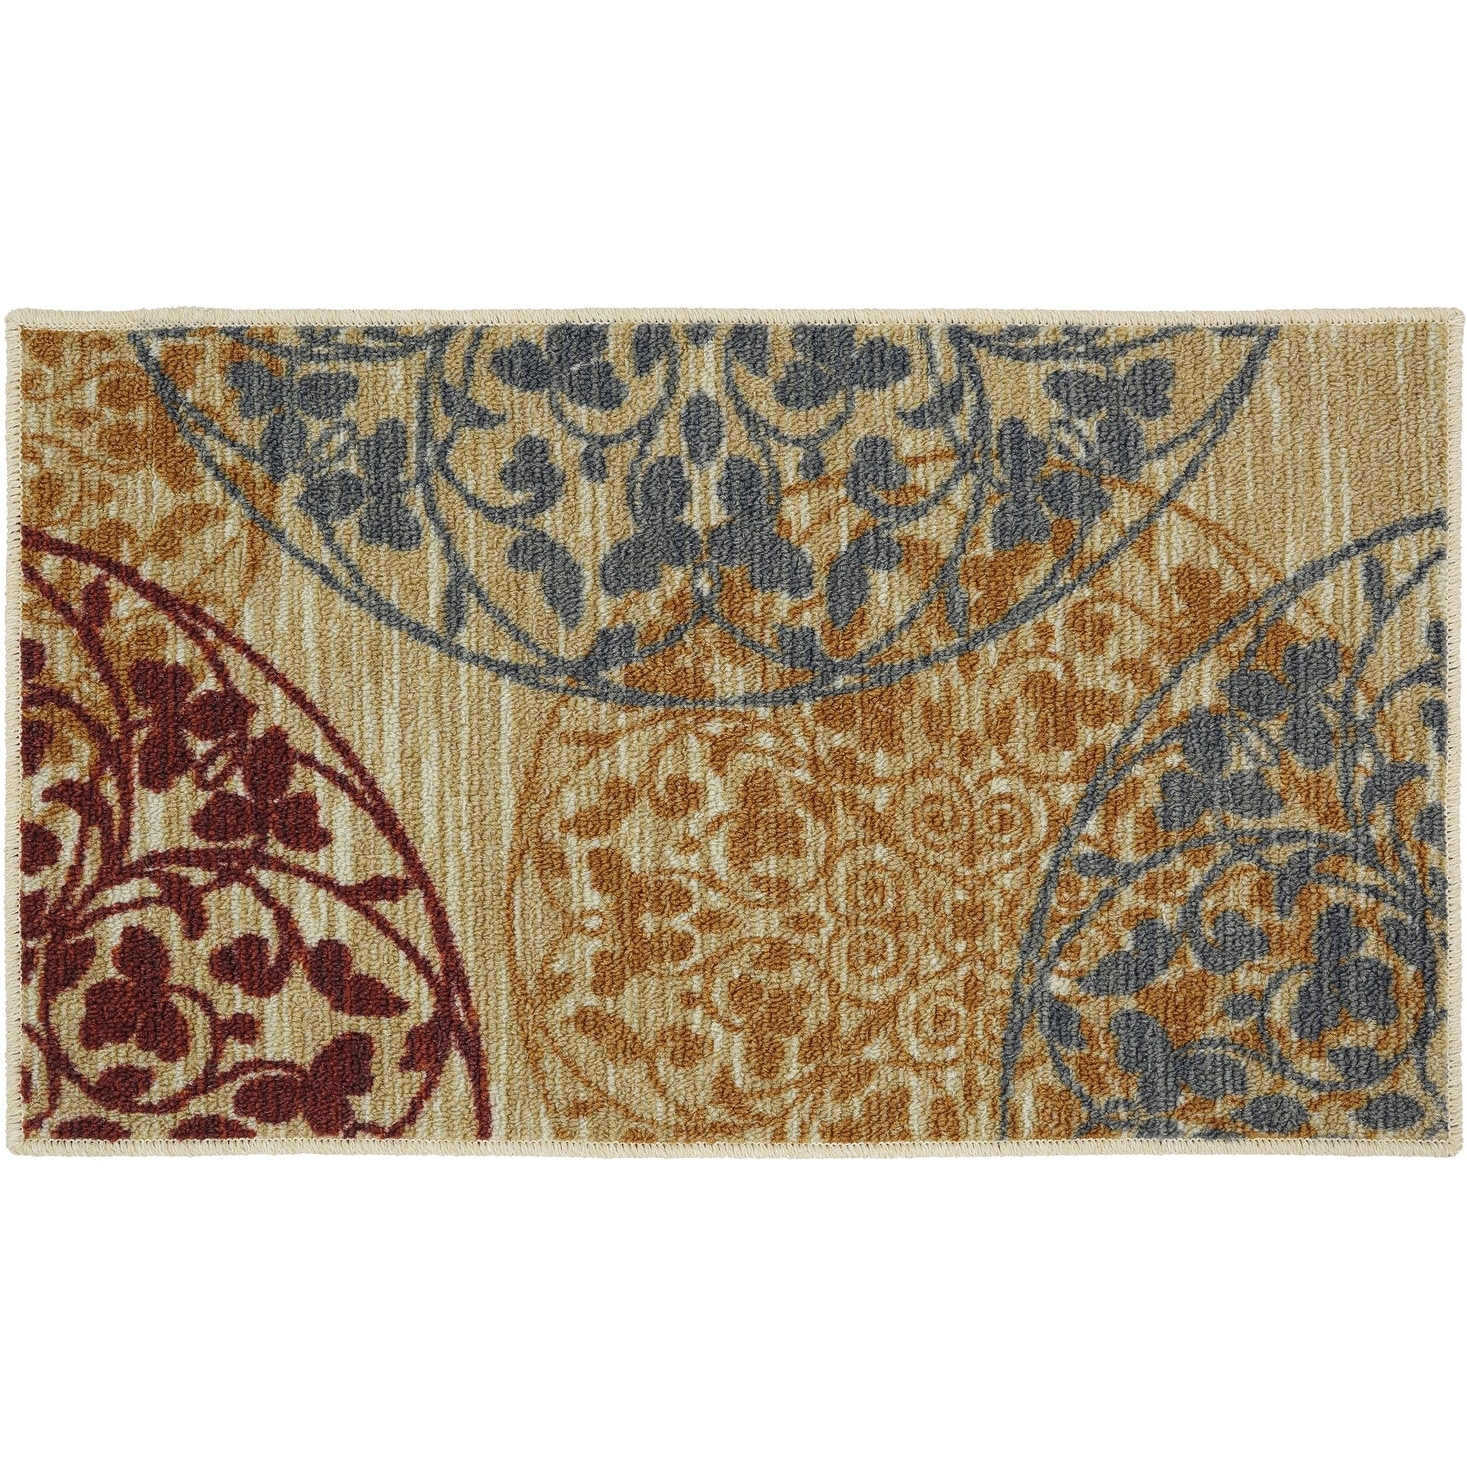 Mohawk Home Medallones Area Rug